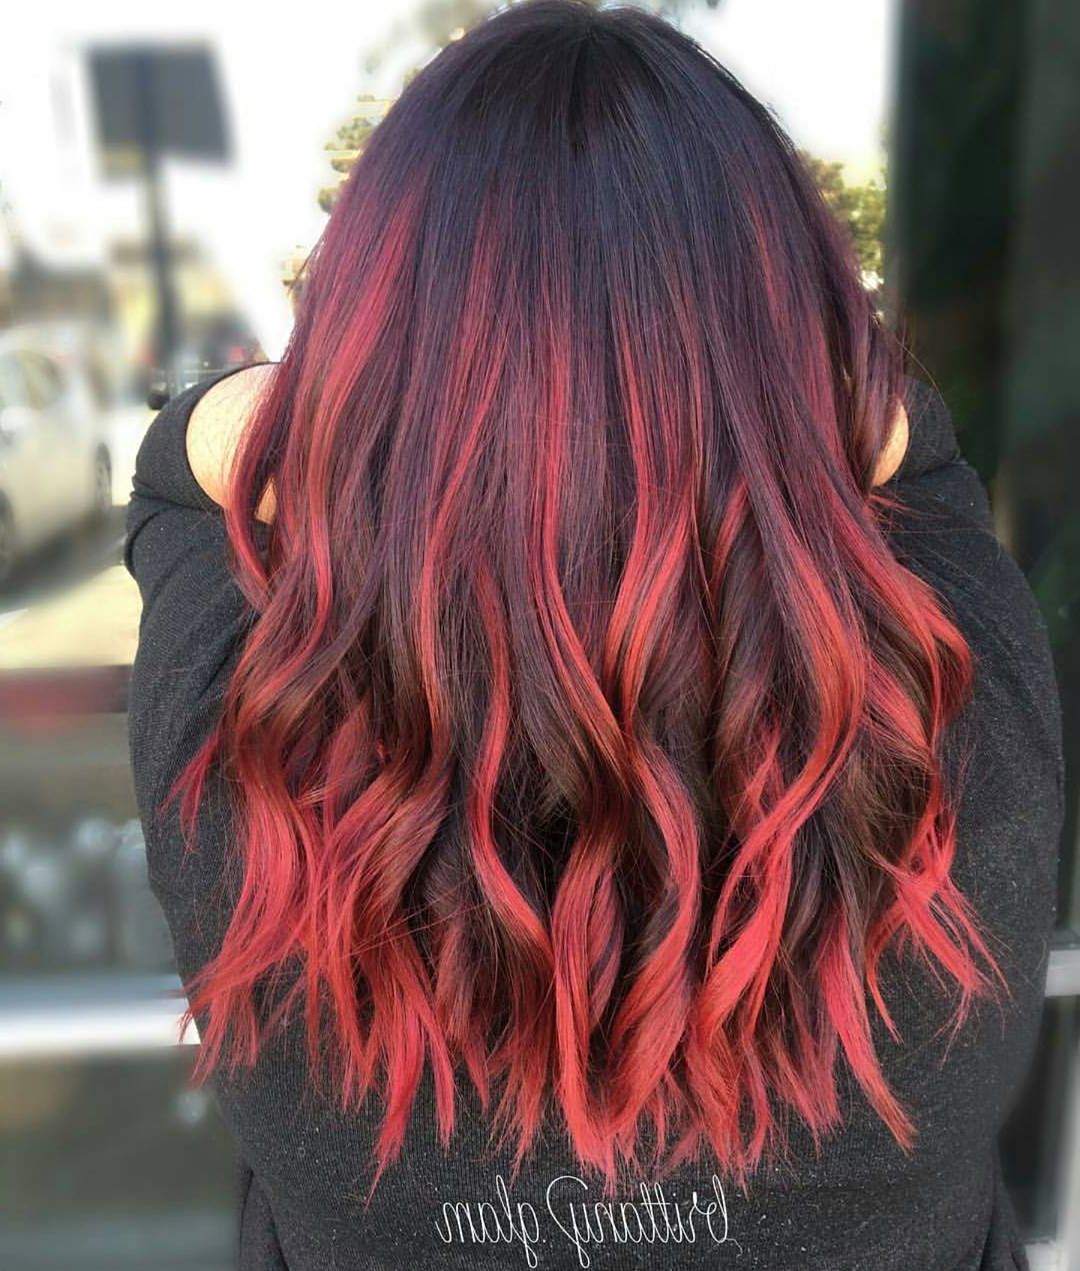 Most Popular Medium Hairstyles And Colors Inside 10 Medium Length Hairstyles For Thick Hair In Super Sexy Colors (View 9 of 20)